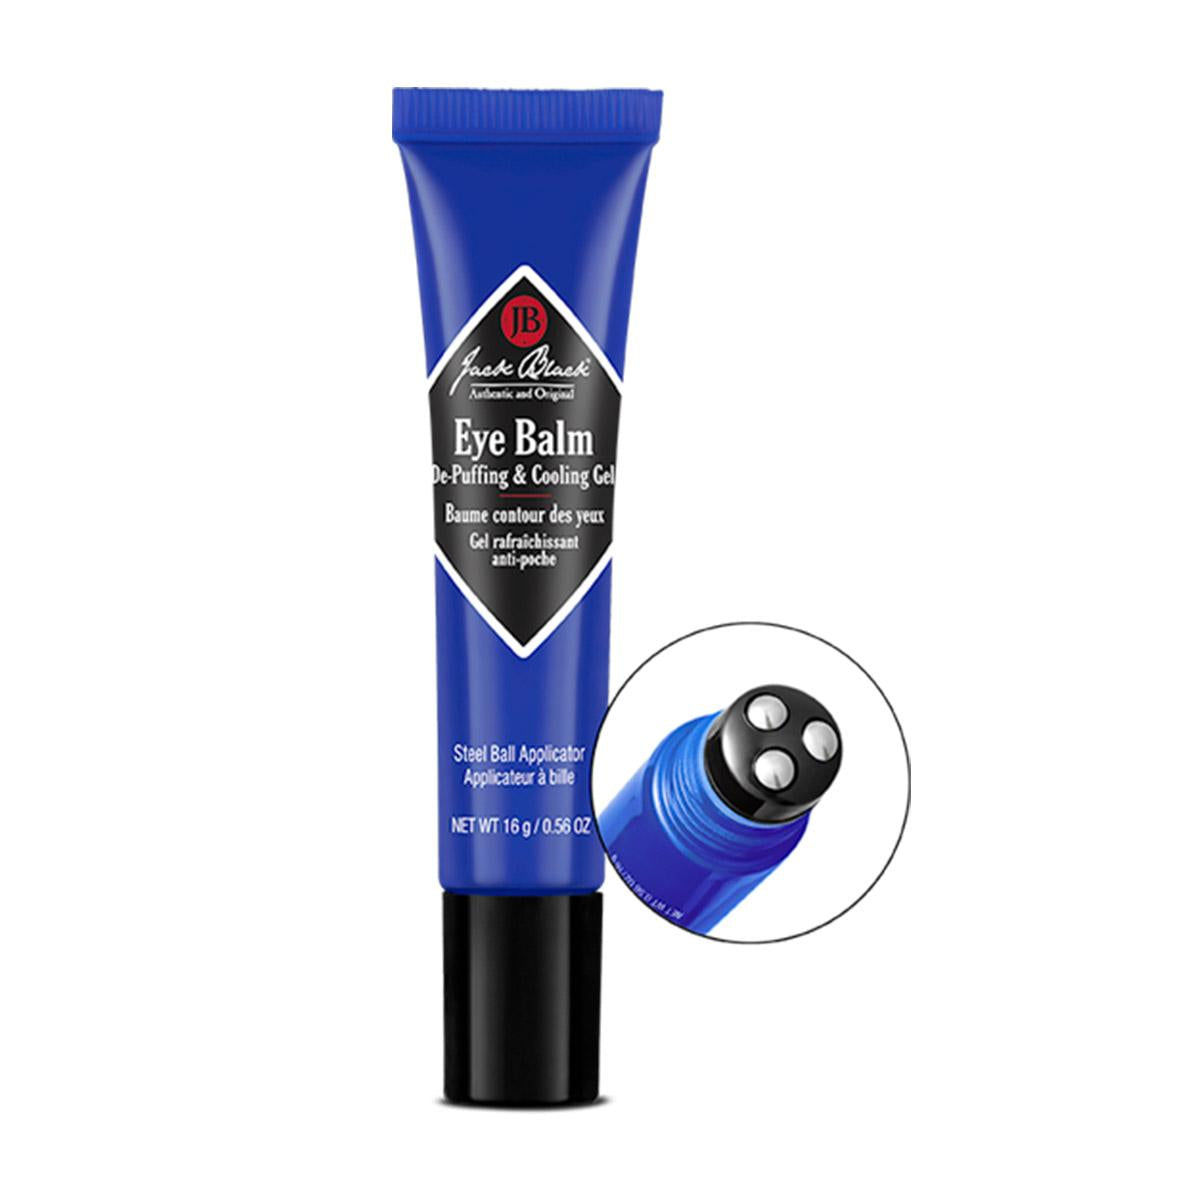 Primary image of Eye Balm De-Puffing + Cooling Gel